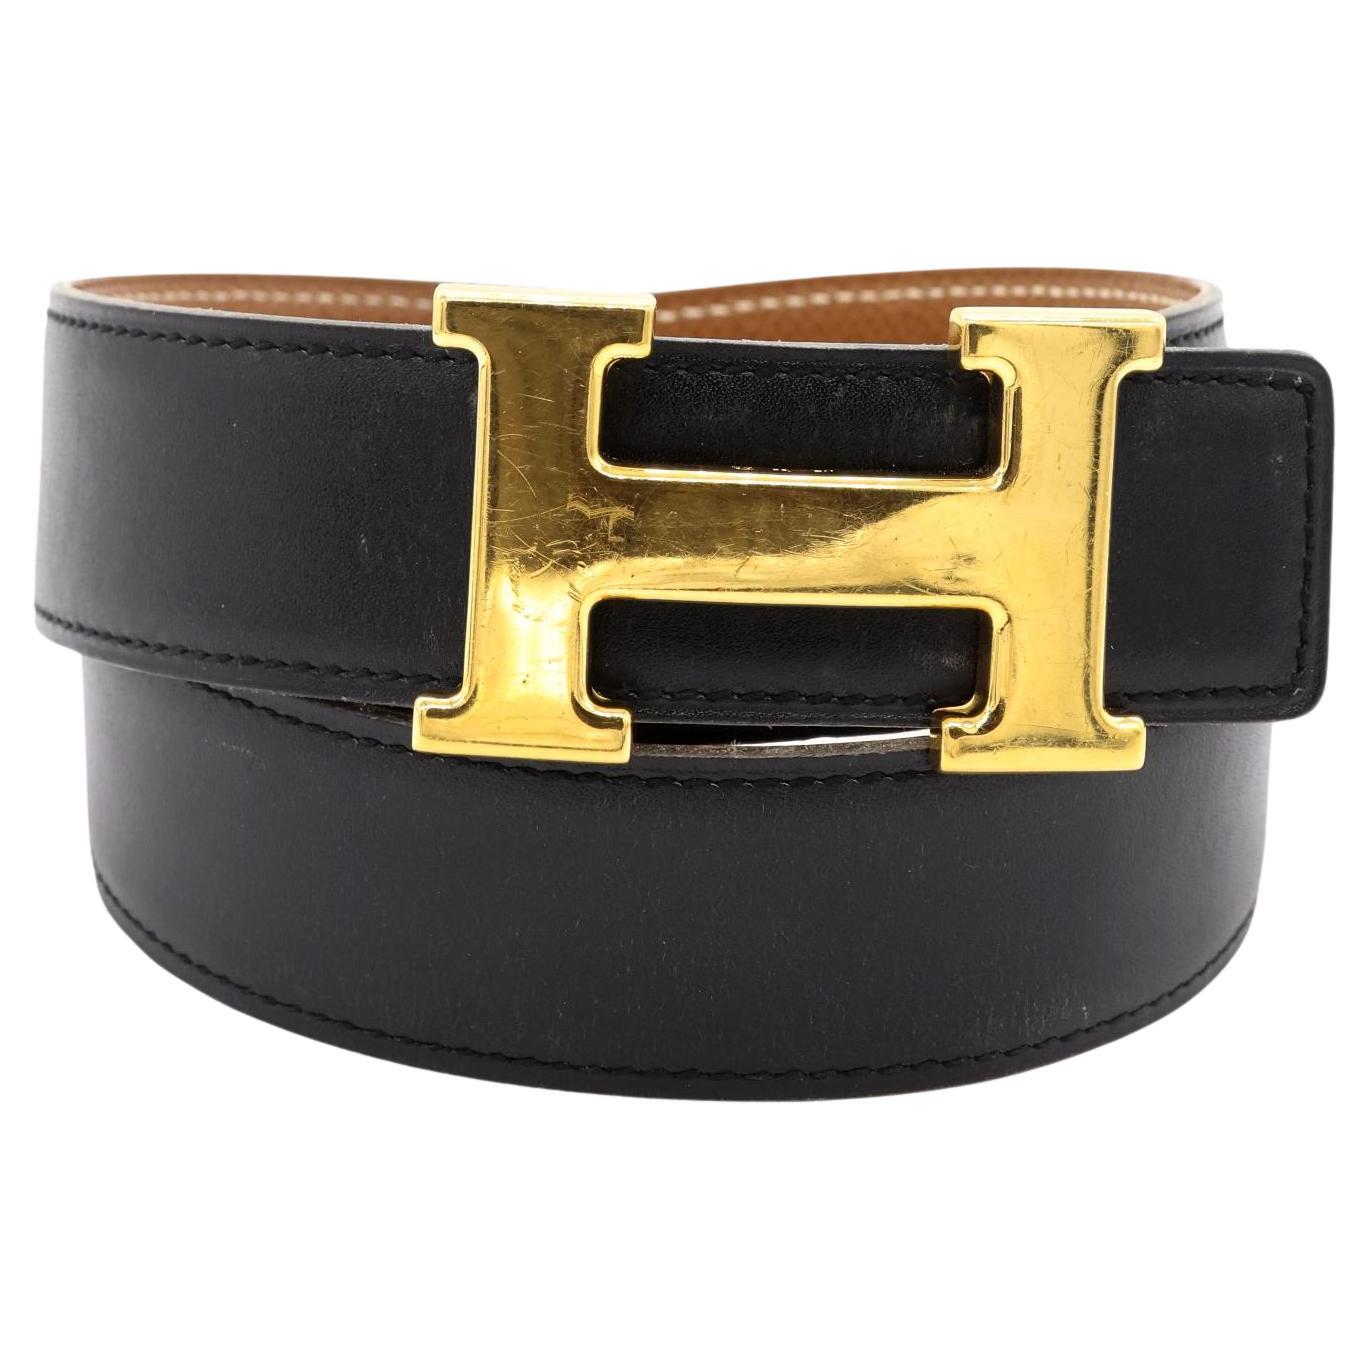 How To Tell If A Hermes Belt Is Real | lupon.gov.ph